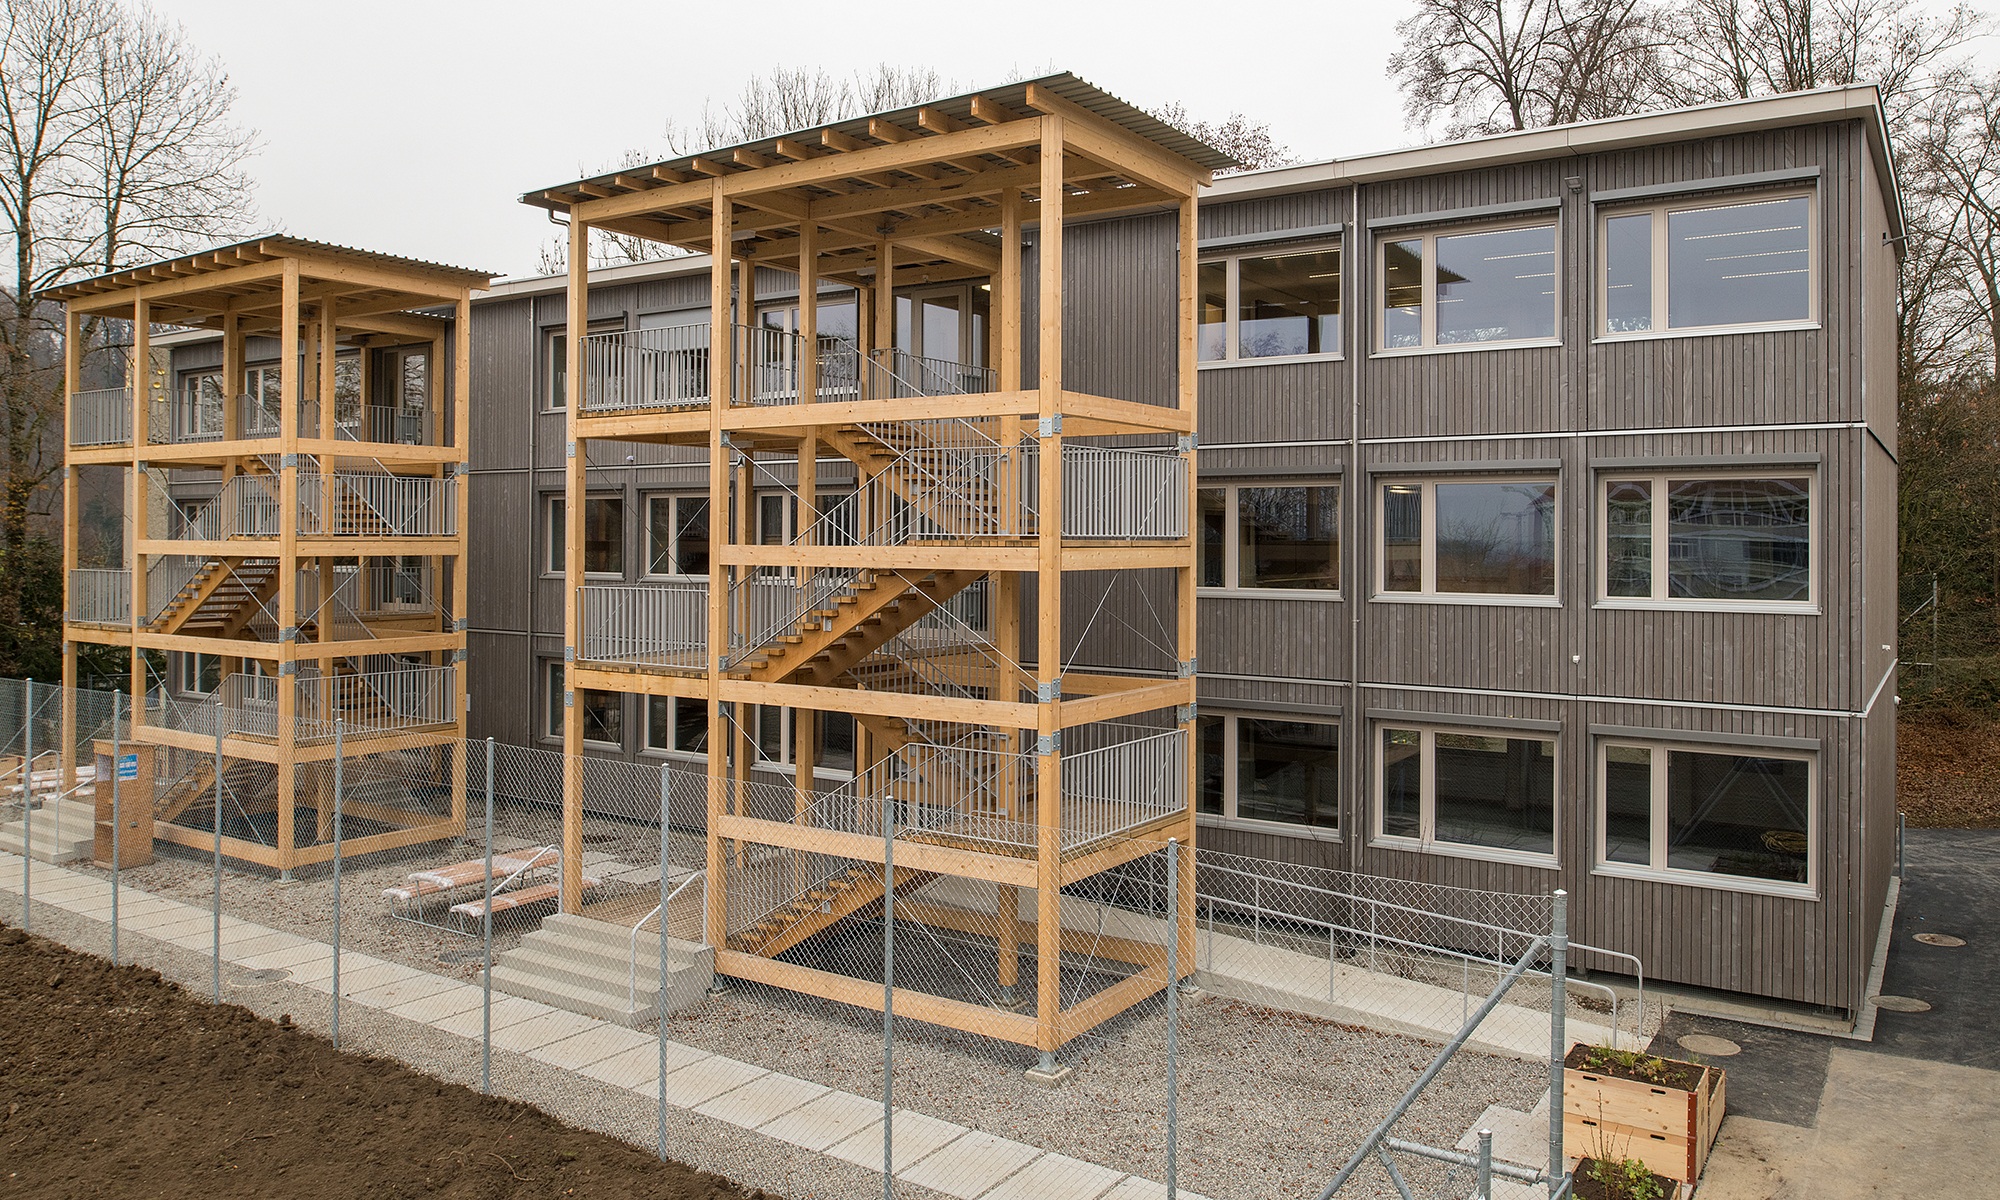 ZM10 modular school building with three storeys and stairwells